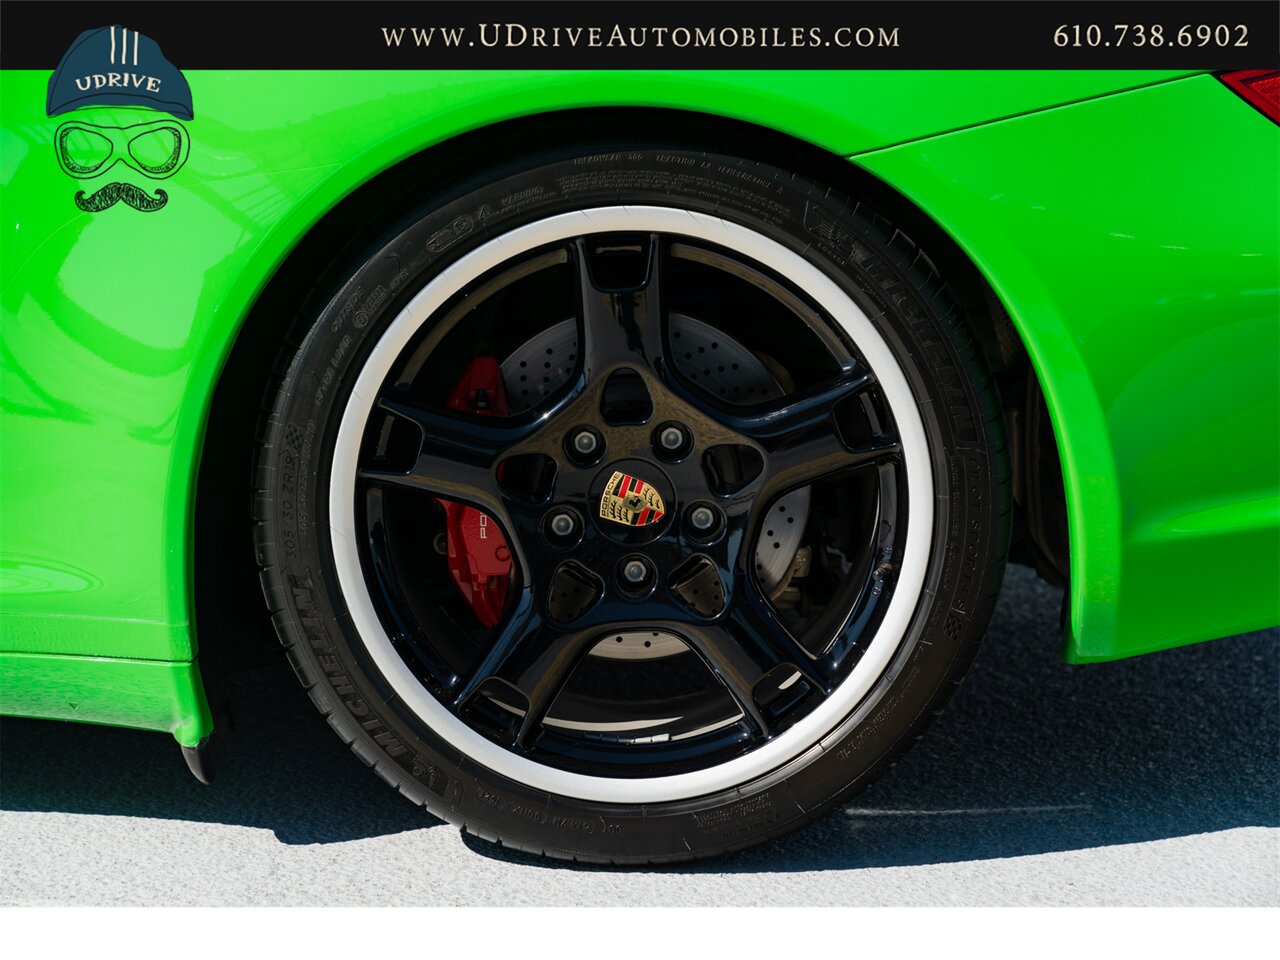 2006 Porsche 911 Carrera 4S  997 PTS Signal Green 6Sp Sport Sts Spt Chrono Spt Exhst - Photo 58 - West Chester, PA 19382